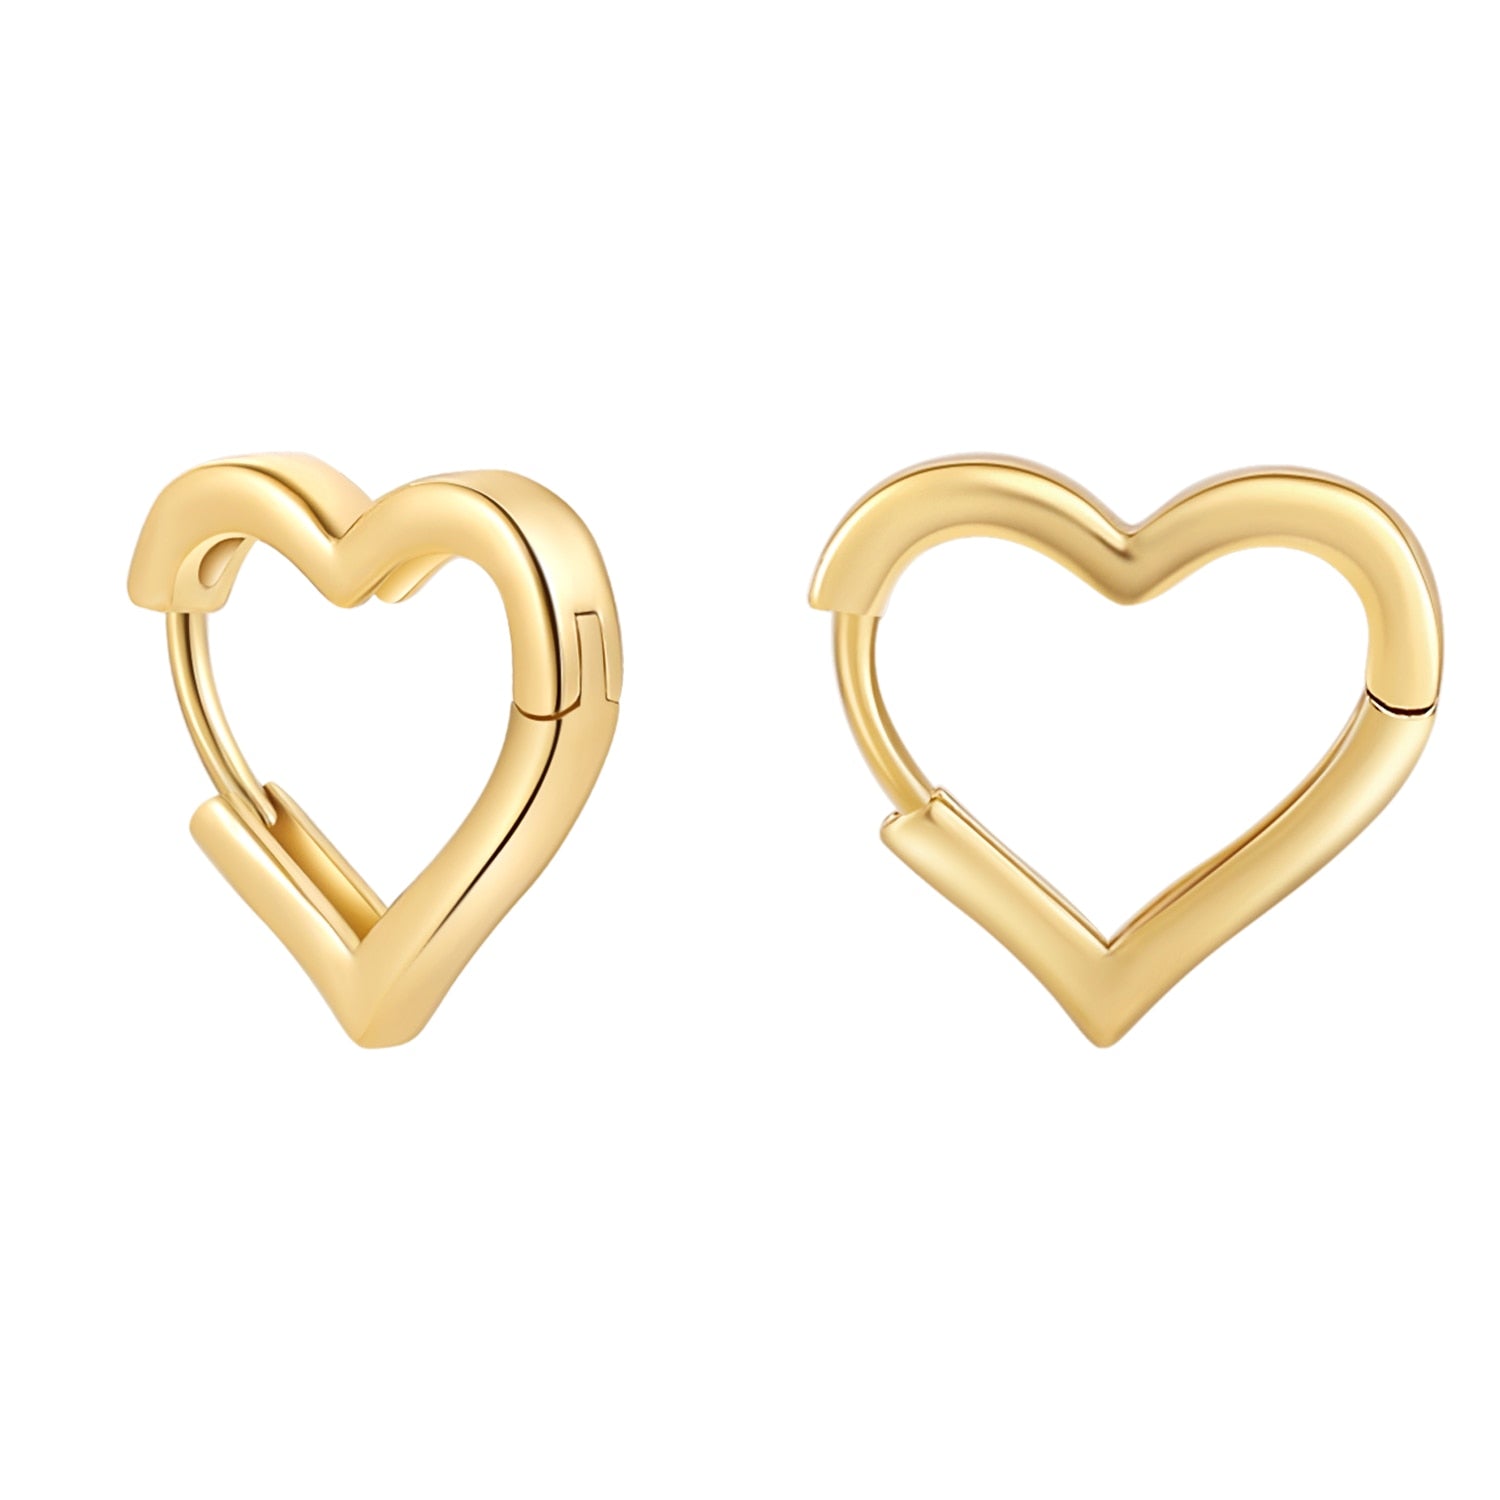 Maytrends 12/14/16mm Fashion Smooth Gold Color Love Heart Hoop Earrings Simple Cute Heart Circle Piercing Earring Buckle Statement Jewelry